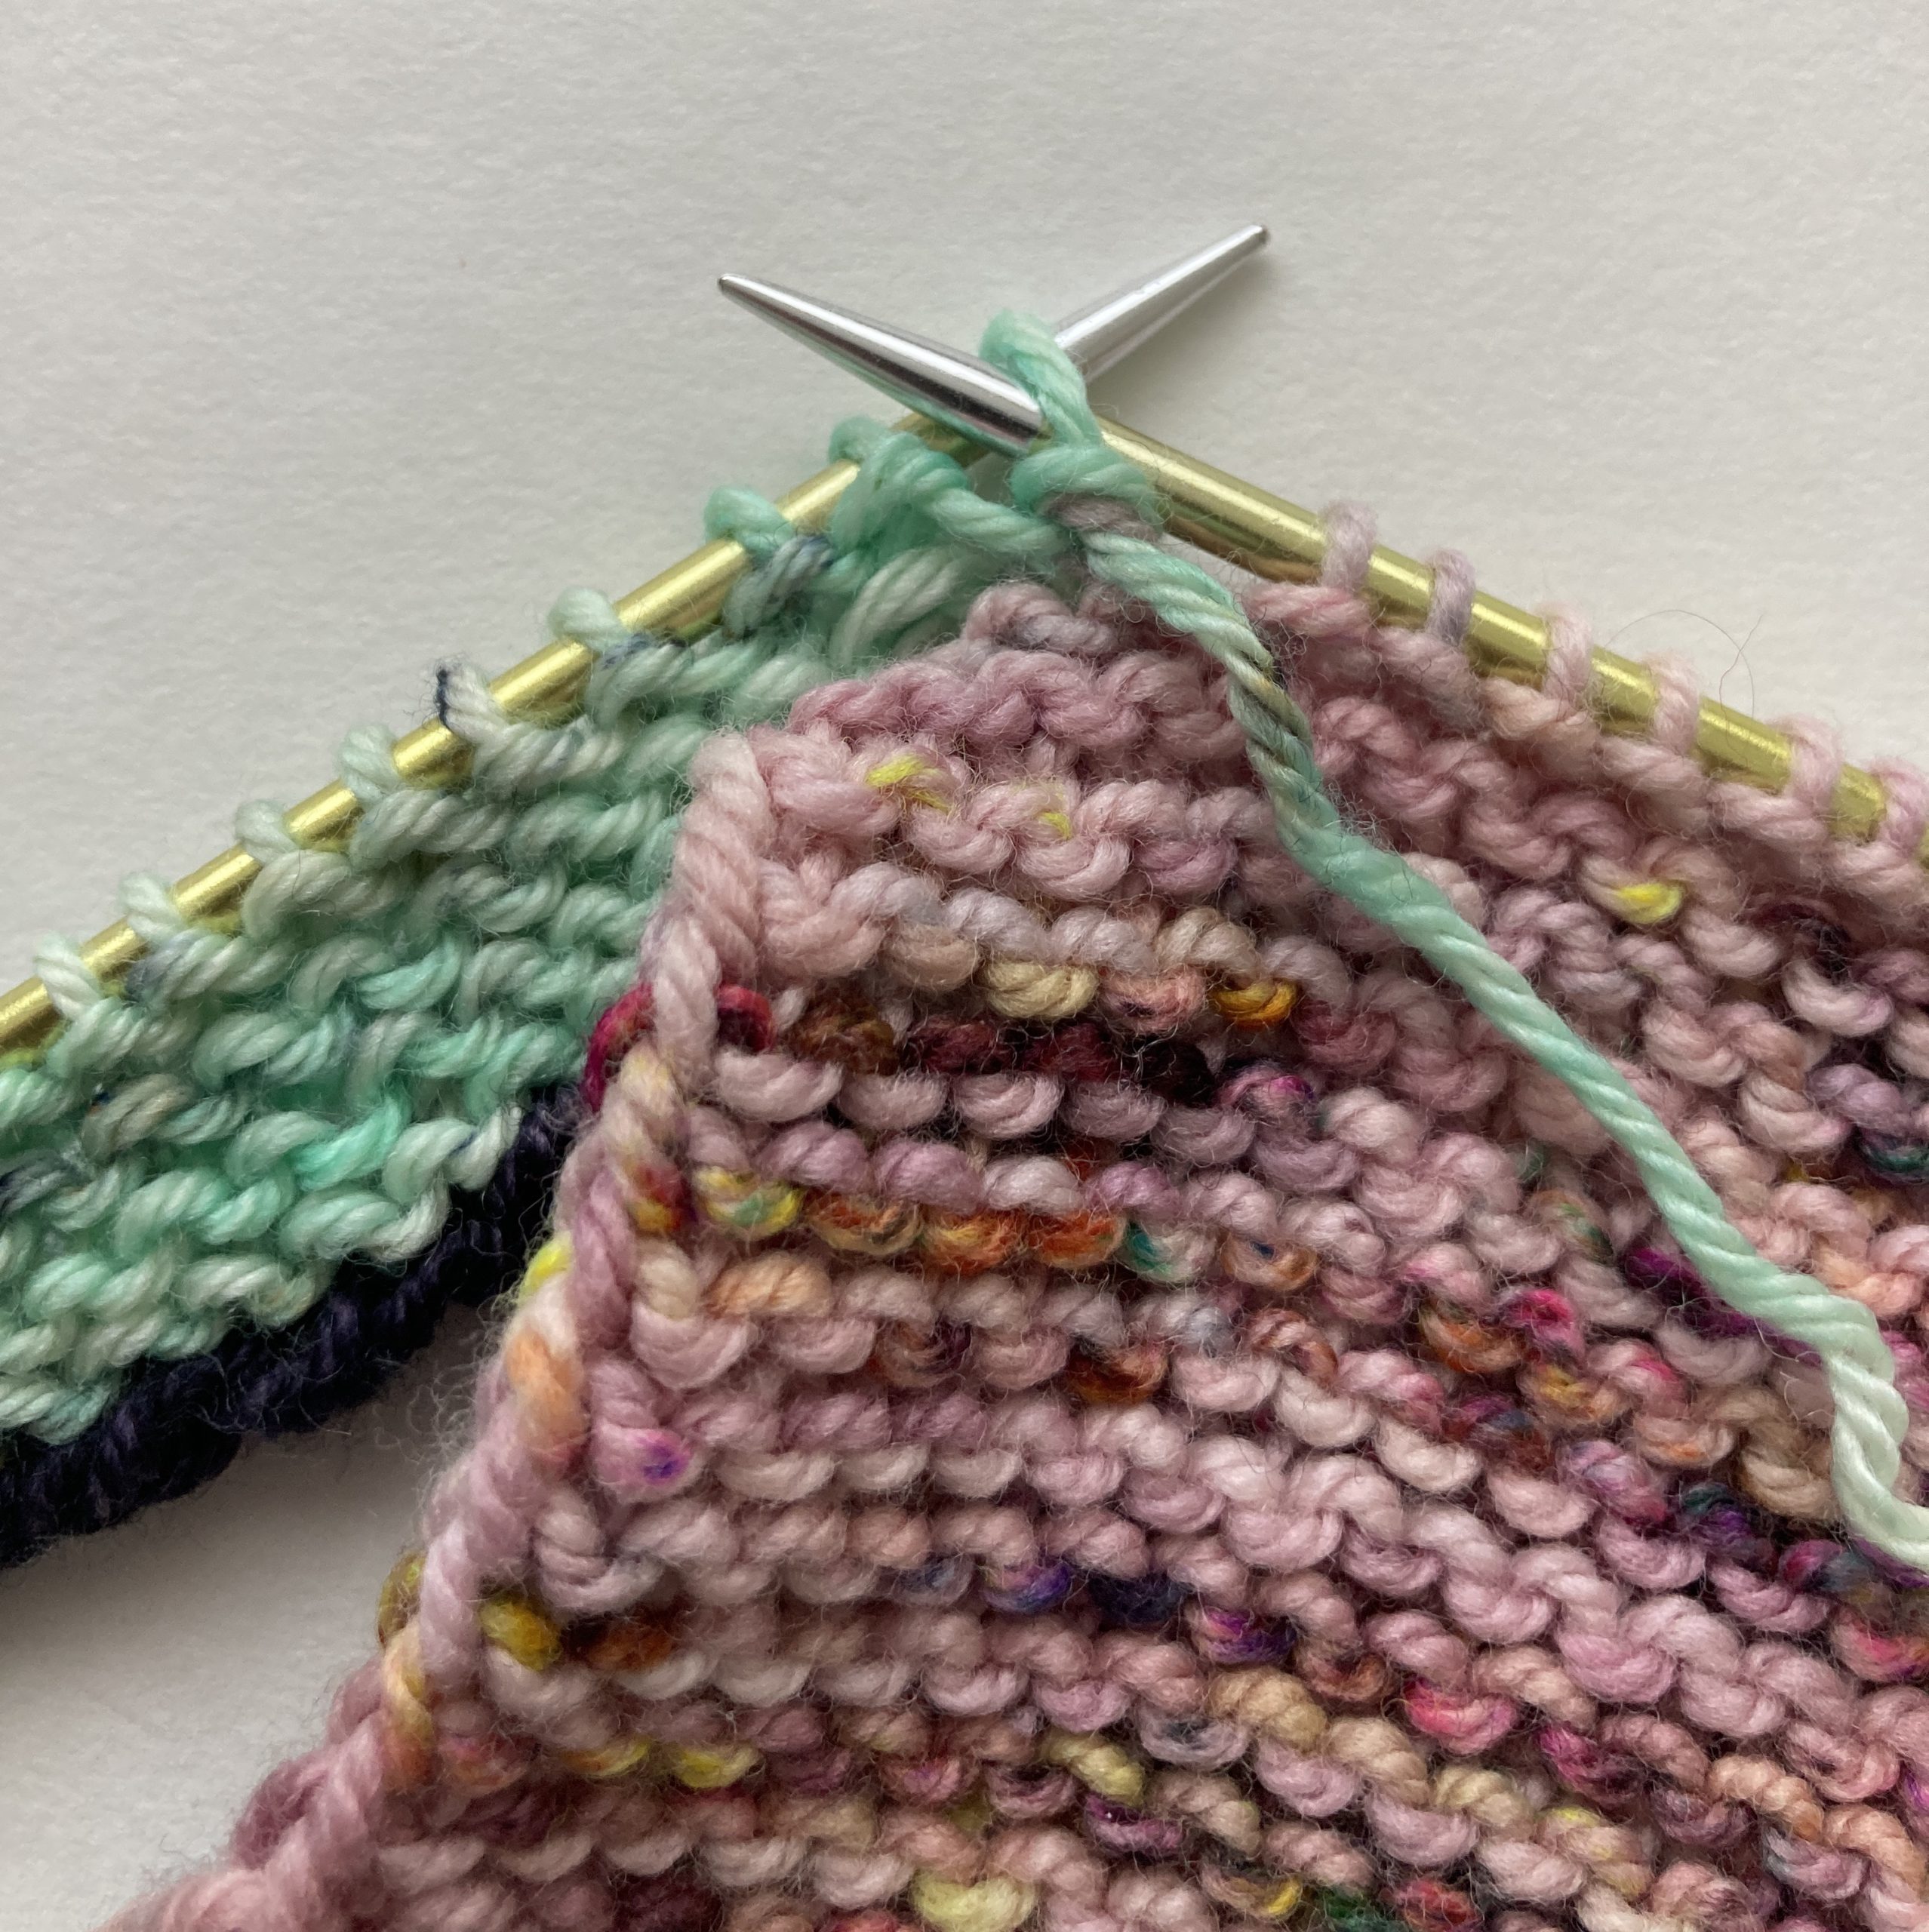 (RS) at start of row. SL1WYIF from working stitches (green) on needle.